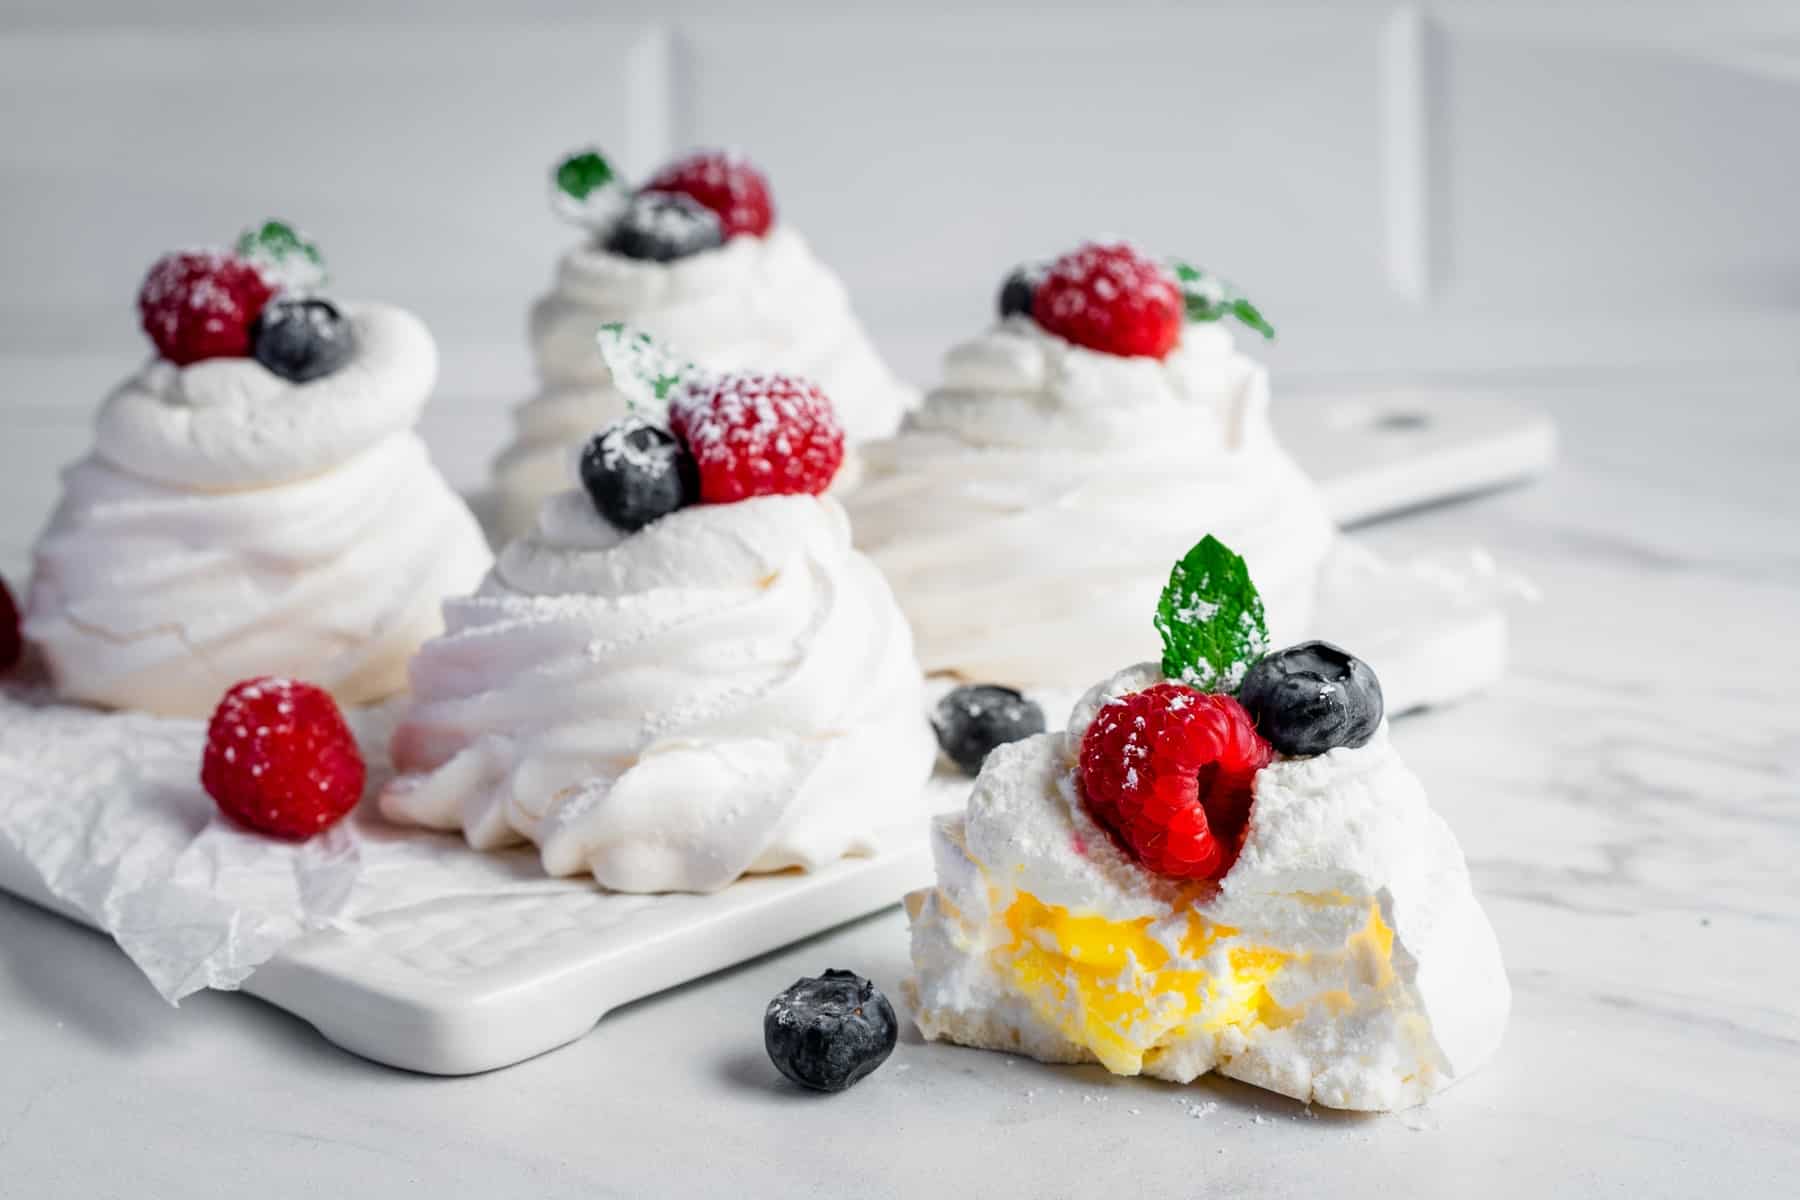 Mini pavlova filled with lemon curd and topped with berries.